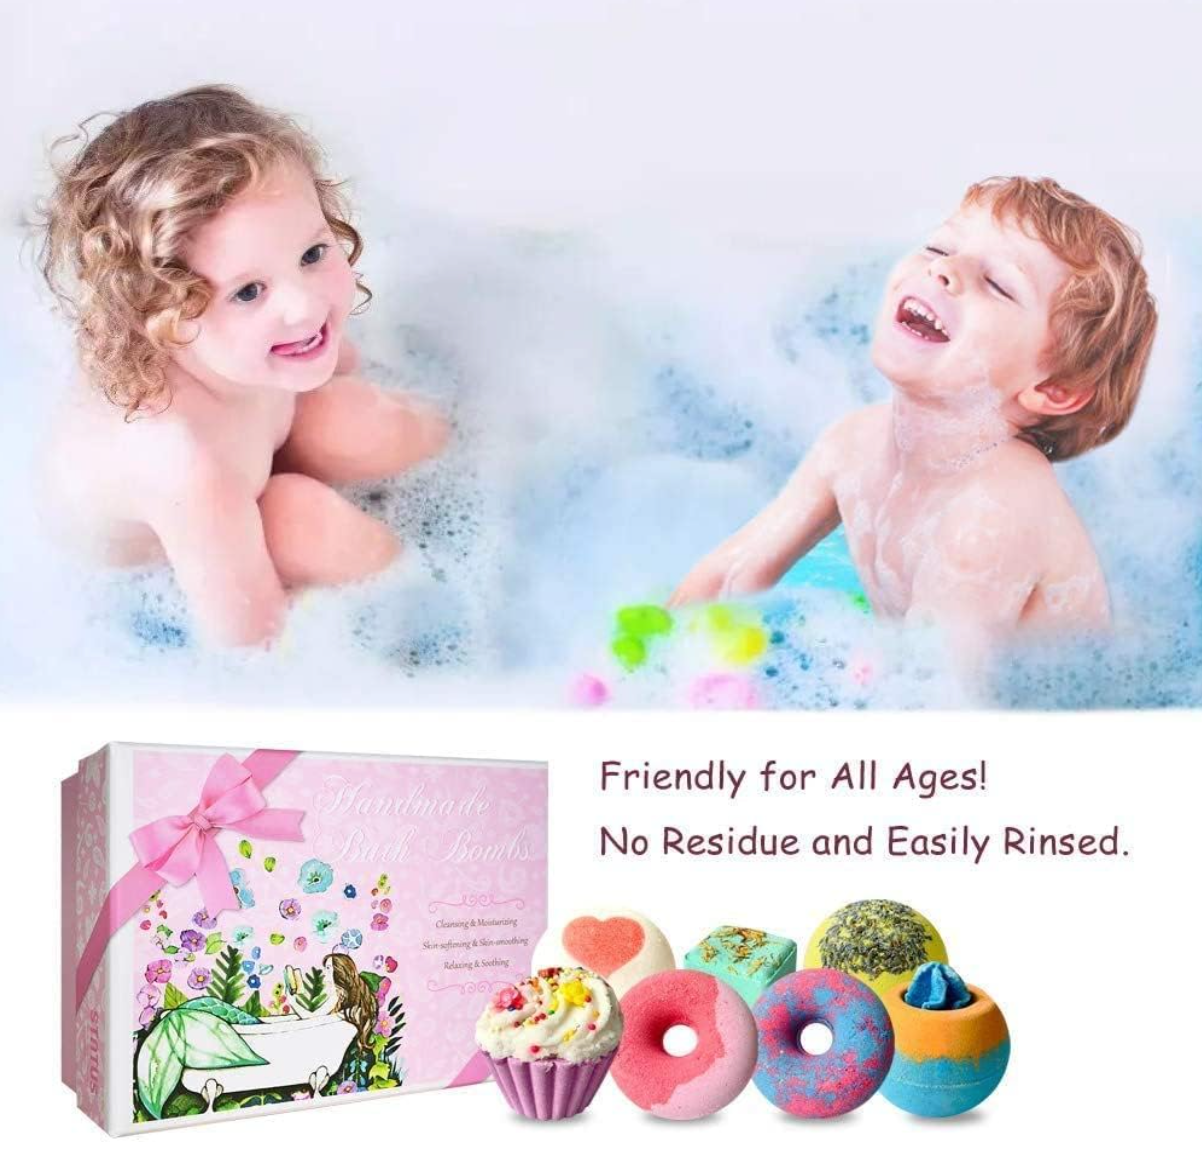 STNTUS INNOVATIONS Bath Bombs, 7 Natural Bath Bomb Gift Set, Handmade Bubble Bathbombs for Women Kids, Gifts for Mom Her Girlfriend, Mothers Day Gifts, Birthday Valentines Christmas Gifts for Women